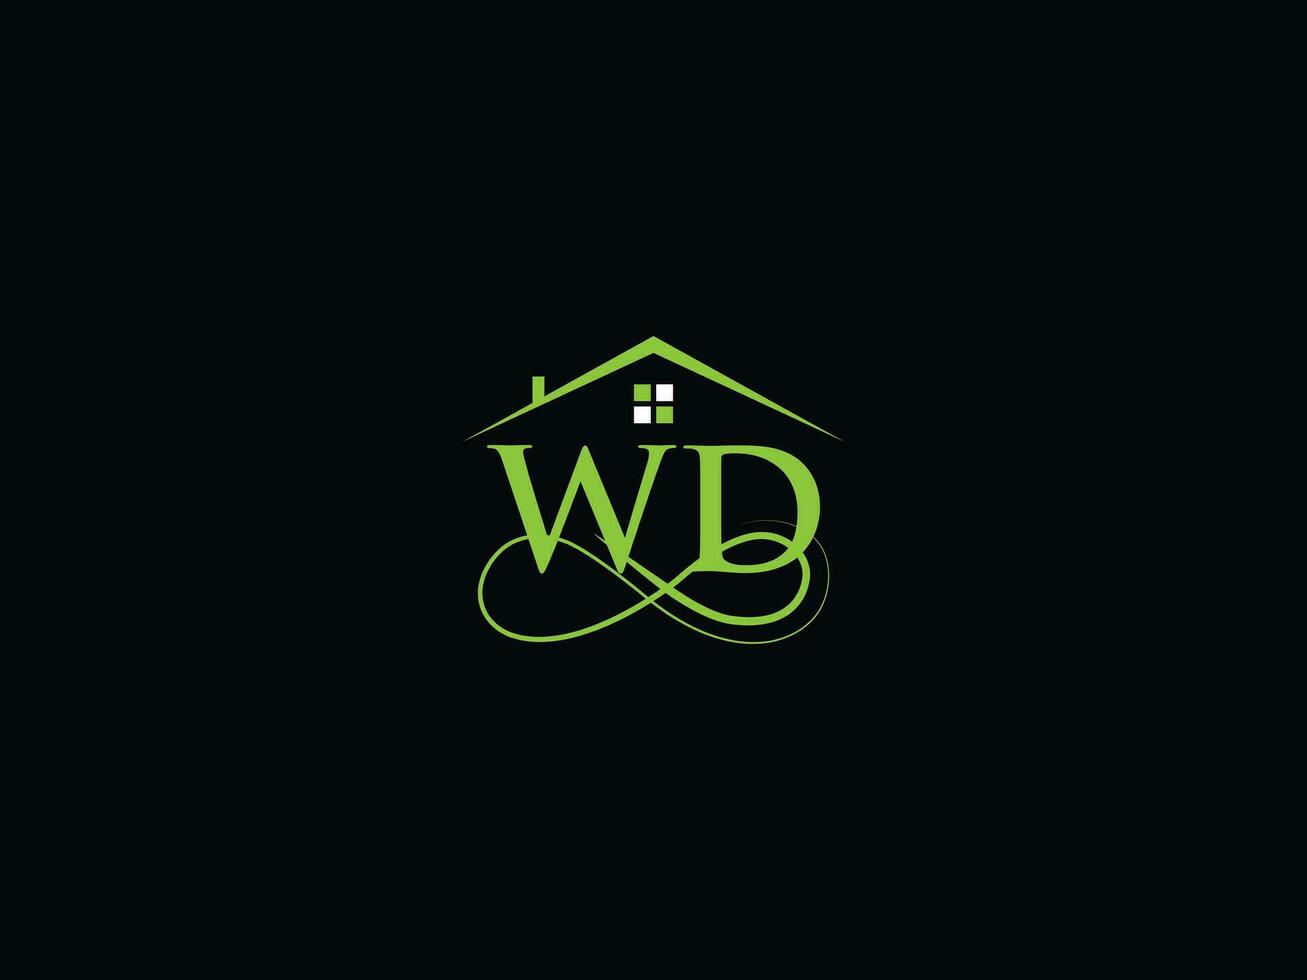 Modern WD Real Estate Logo, Luxury Wd Logo Icon Vector For Building Business